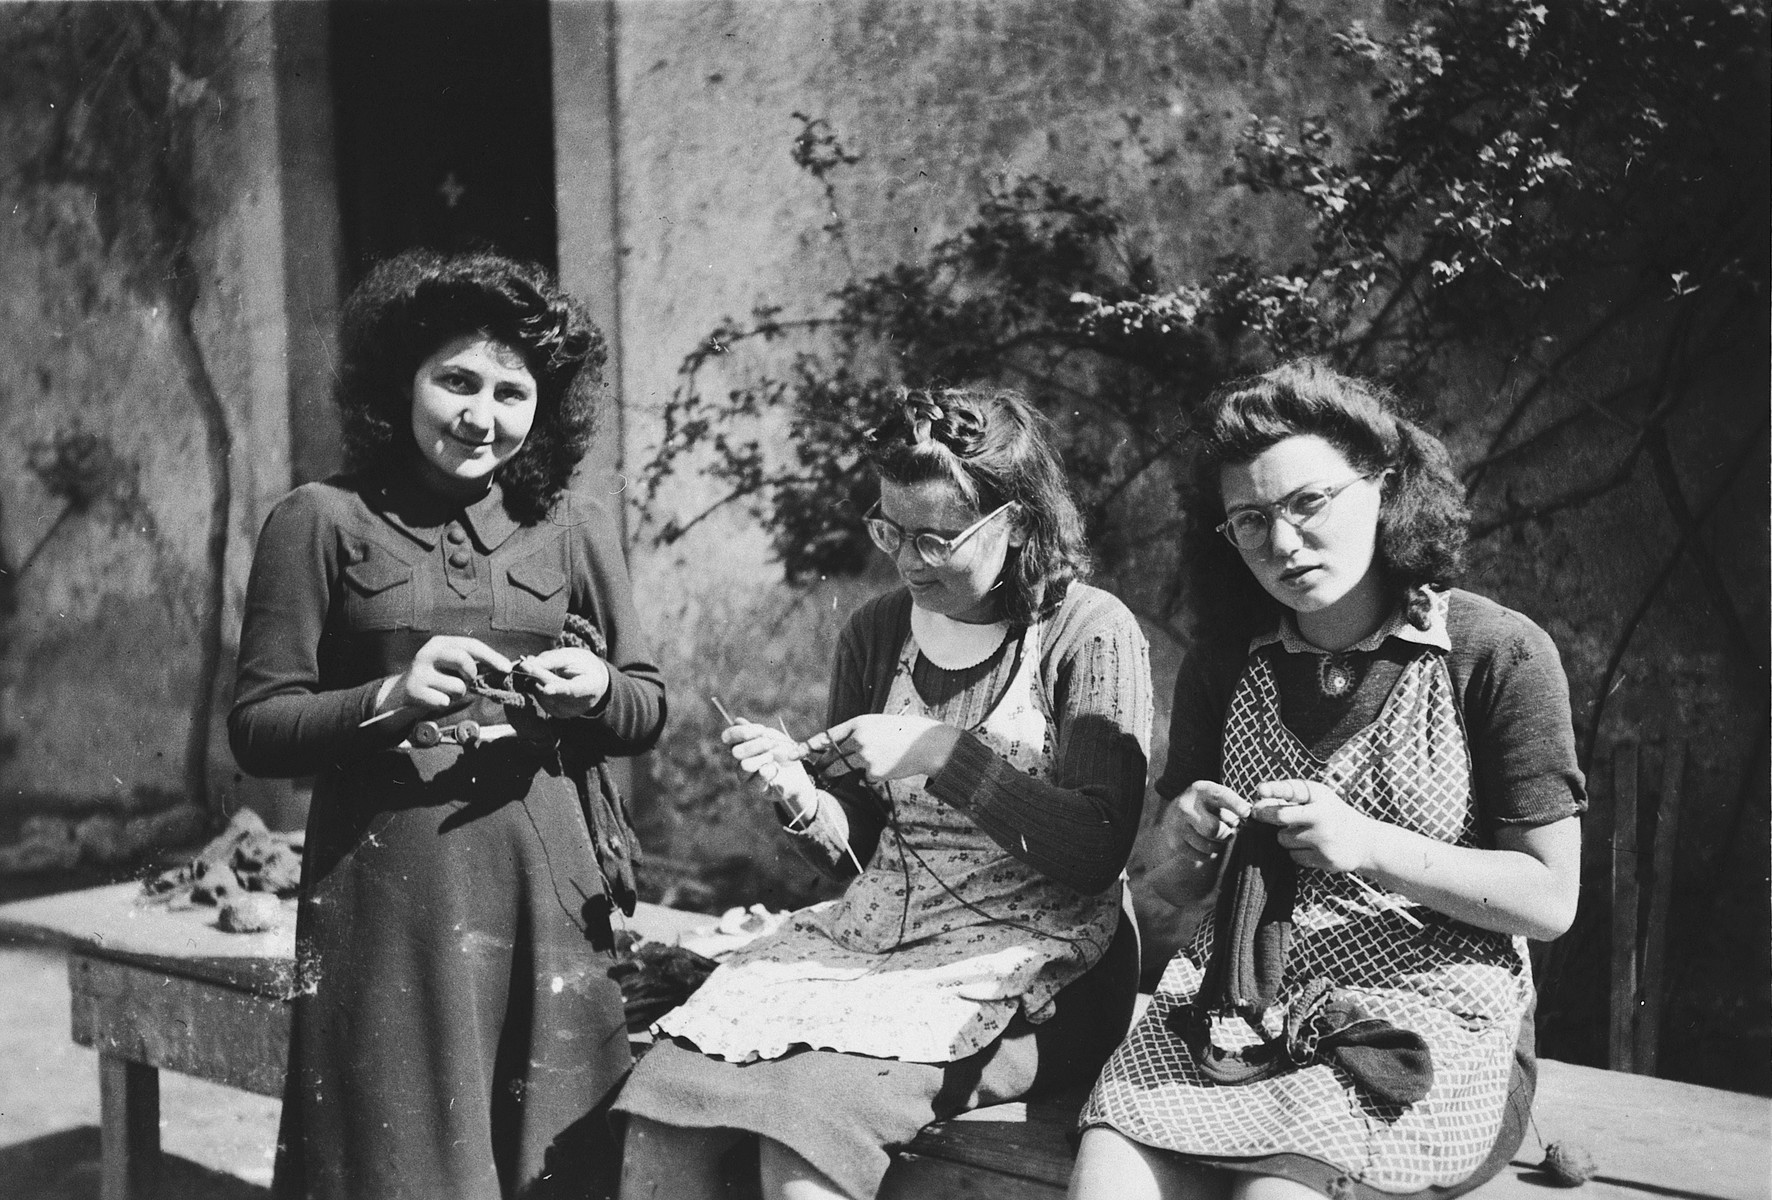 Girls practice knitting in Chateau de la Hille.

Pictured are Gerti Lind, Anne-Marie Piguet (a teacher) and Cilly Stueckler.